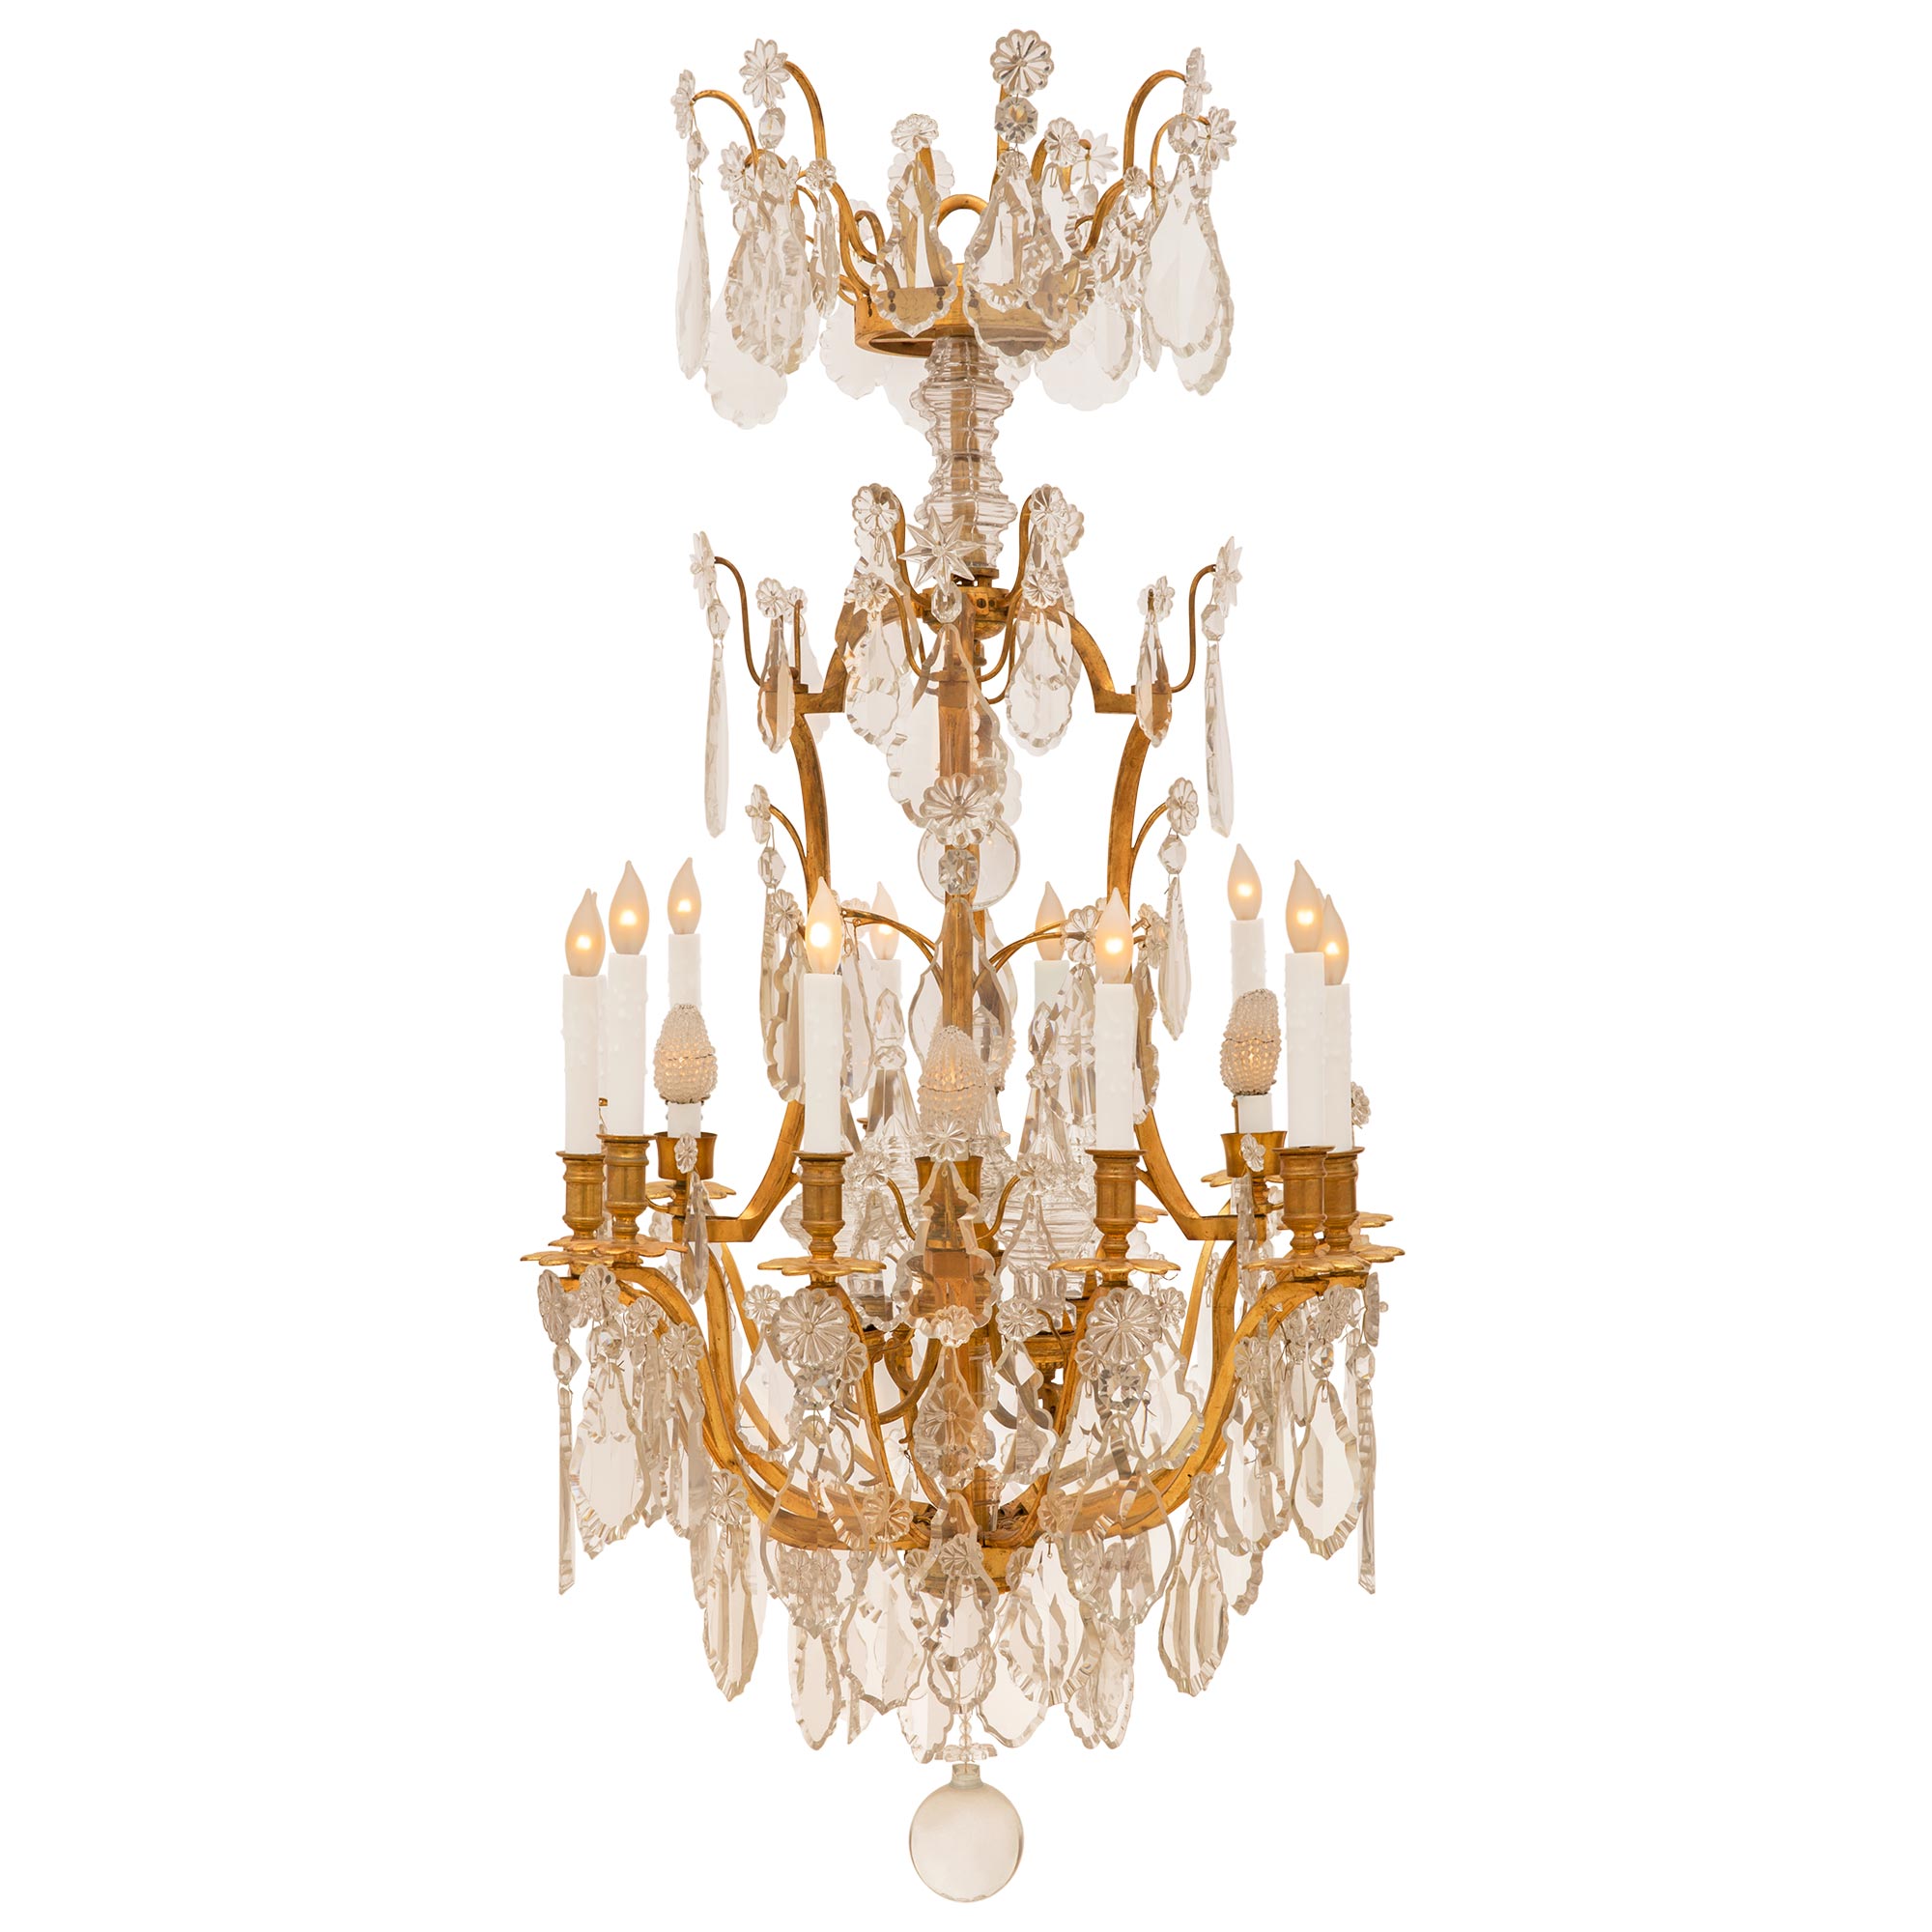 French 19th Century Louis XV Style Baccarat Crystal Chandelier For Sale